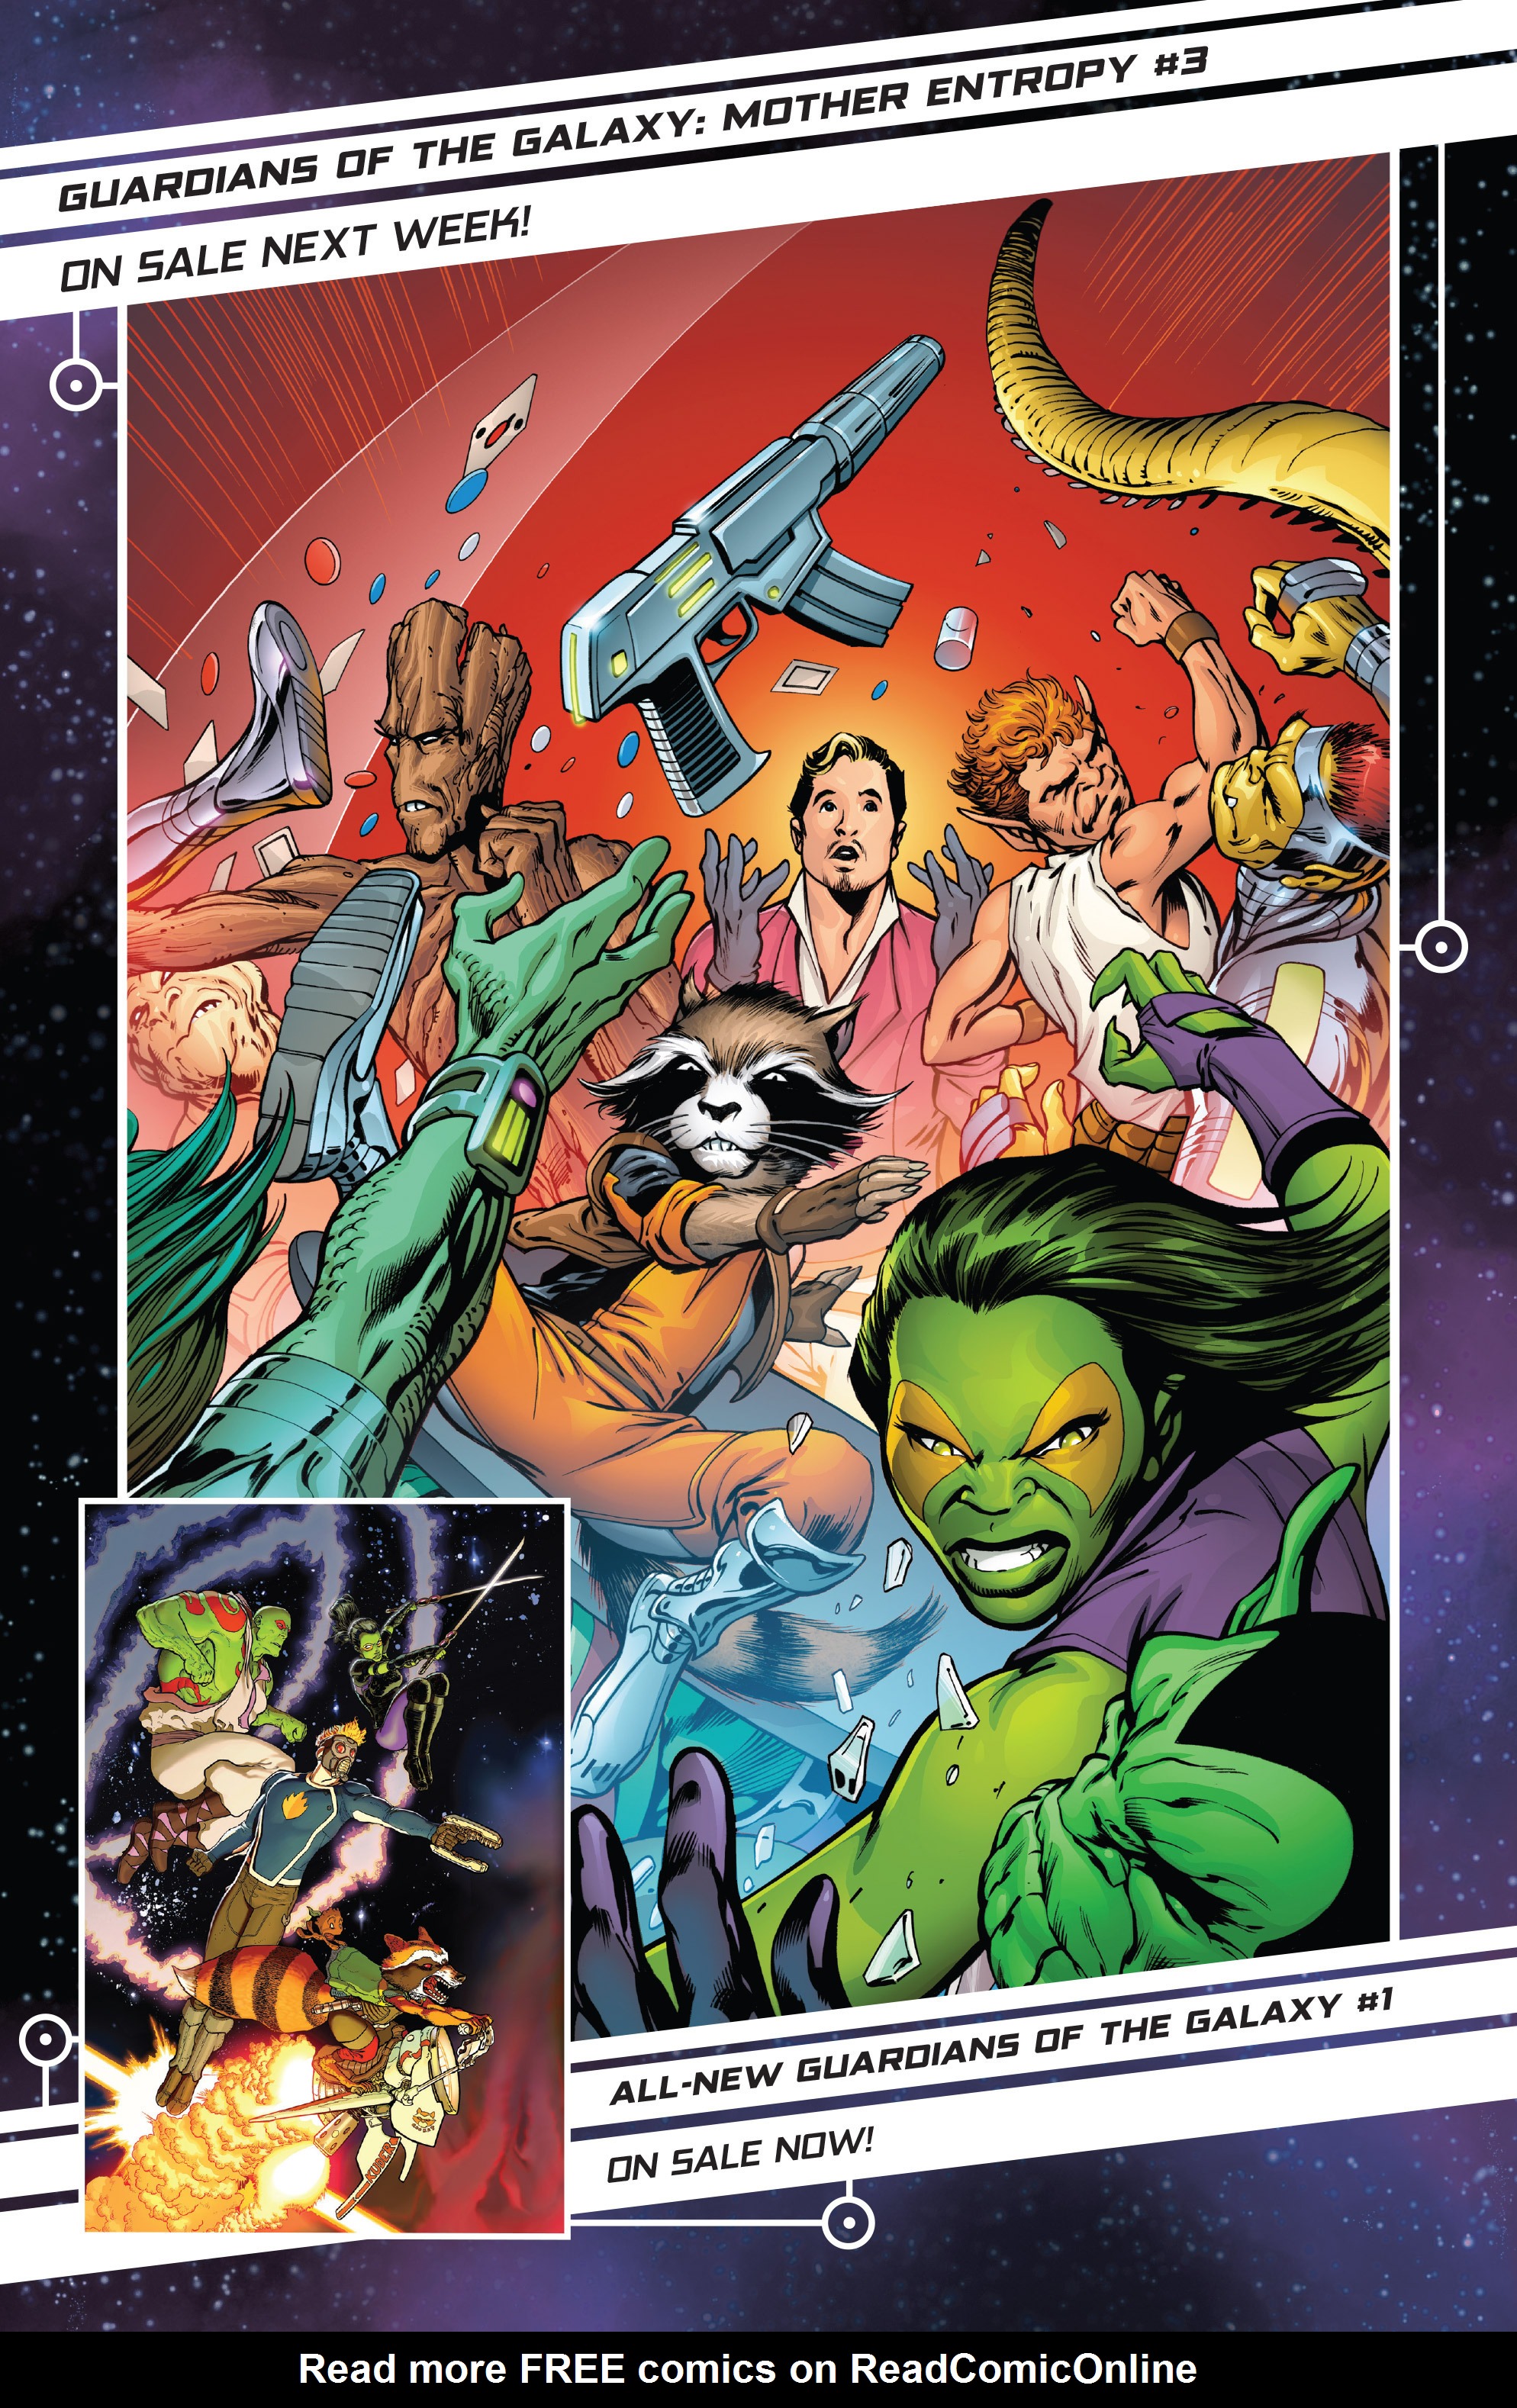 Read online Guardians of the Galaxy: Mother Entropy comic -  Issue #2 - 22